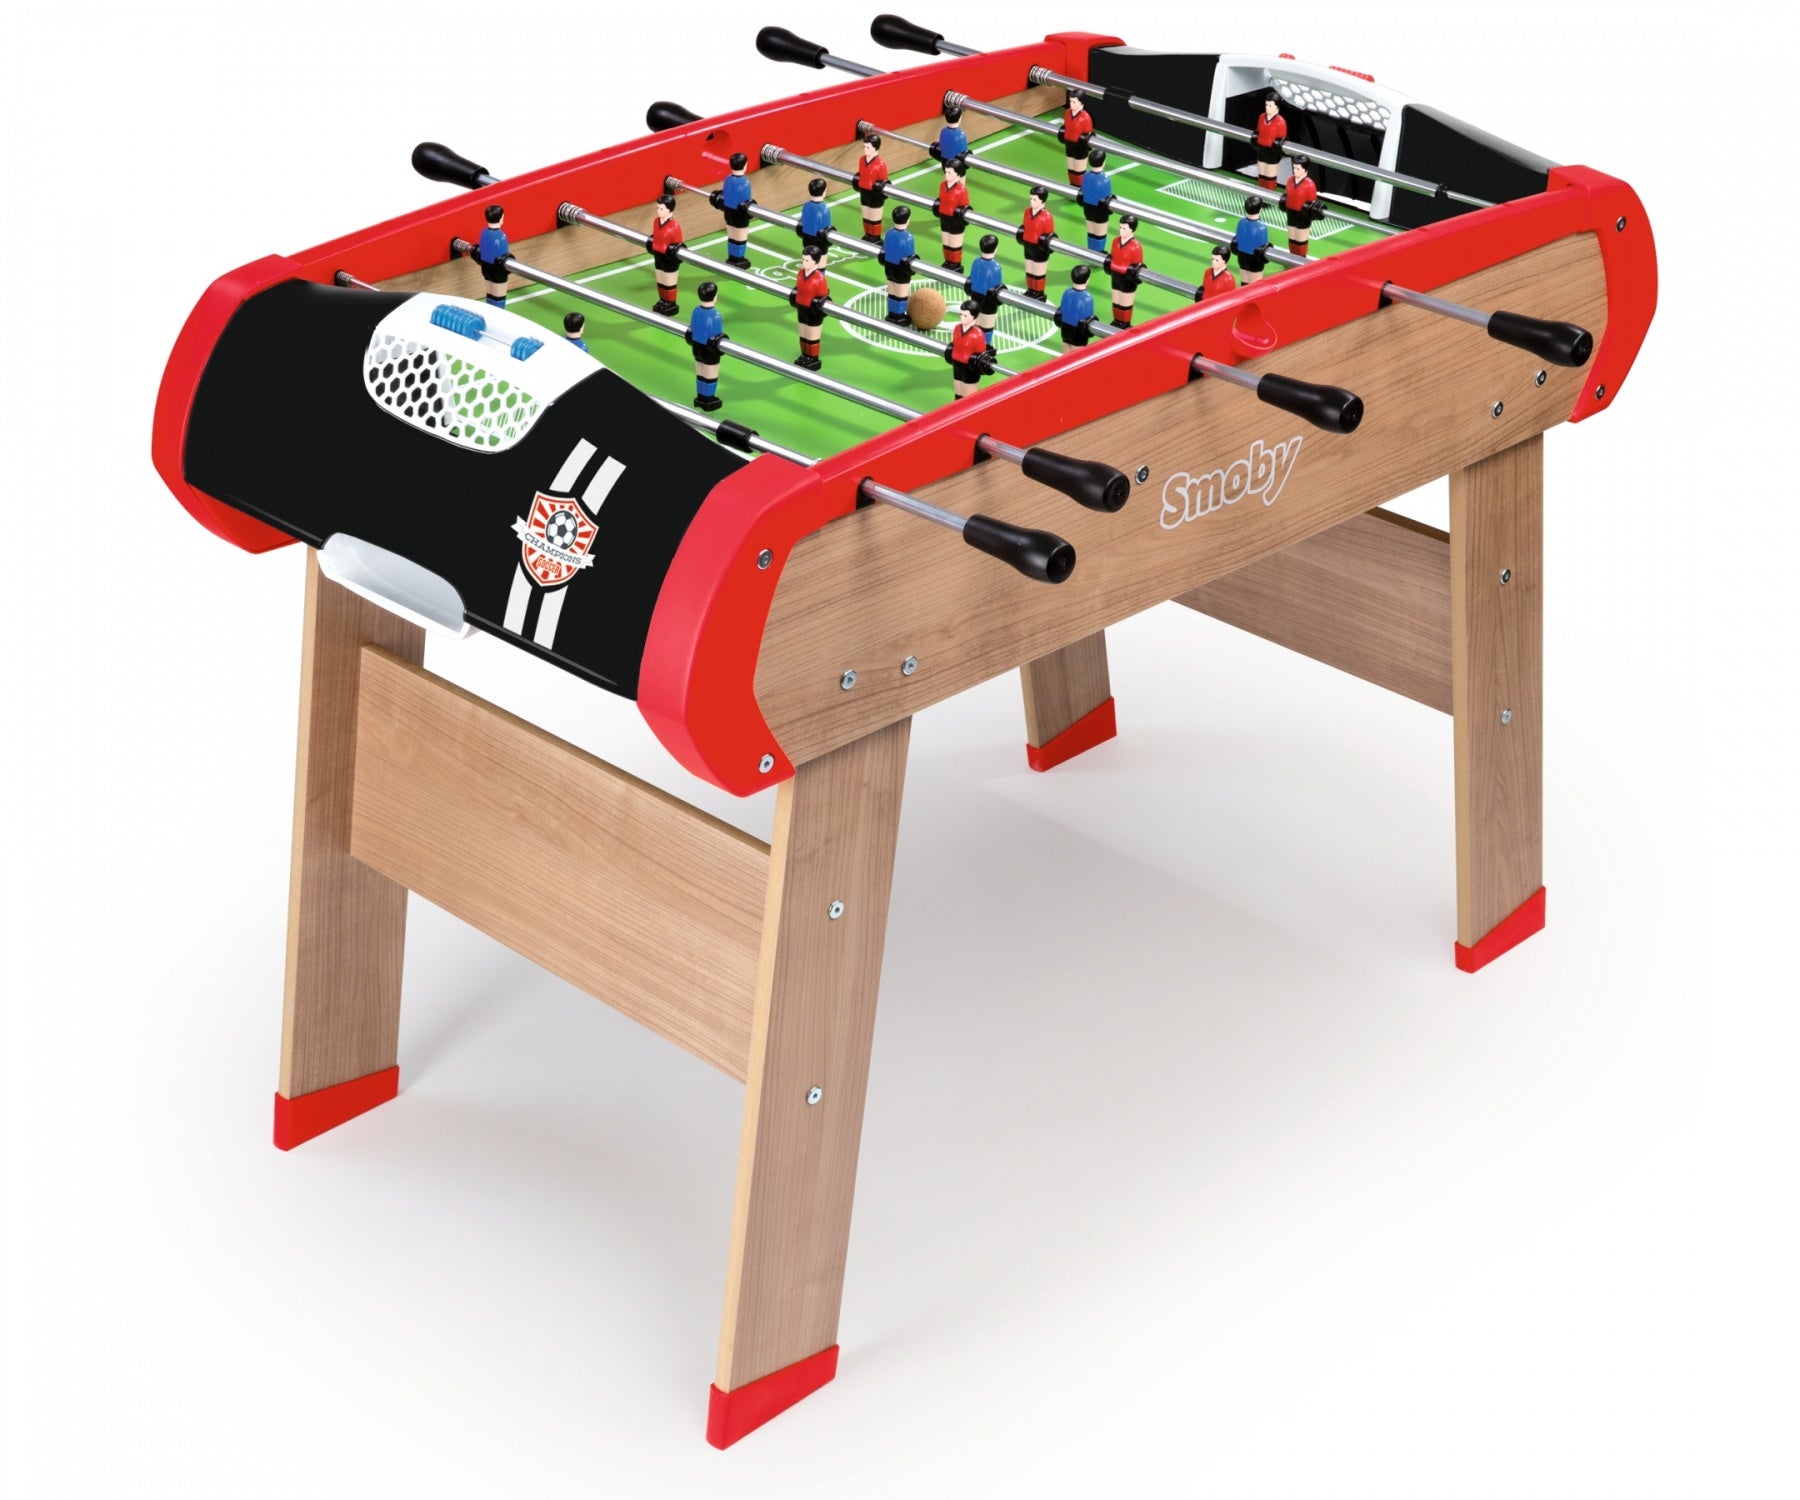 Smoby Champions Football / Soccer Table